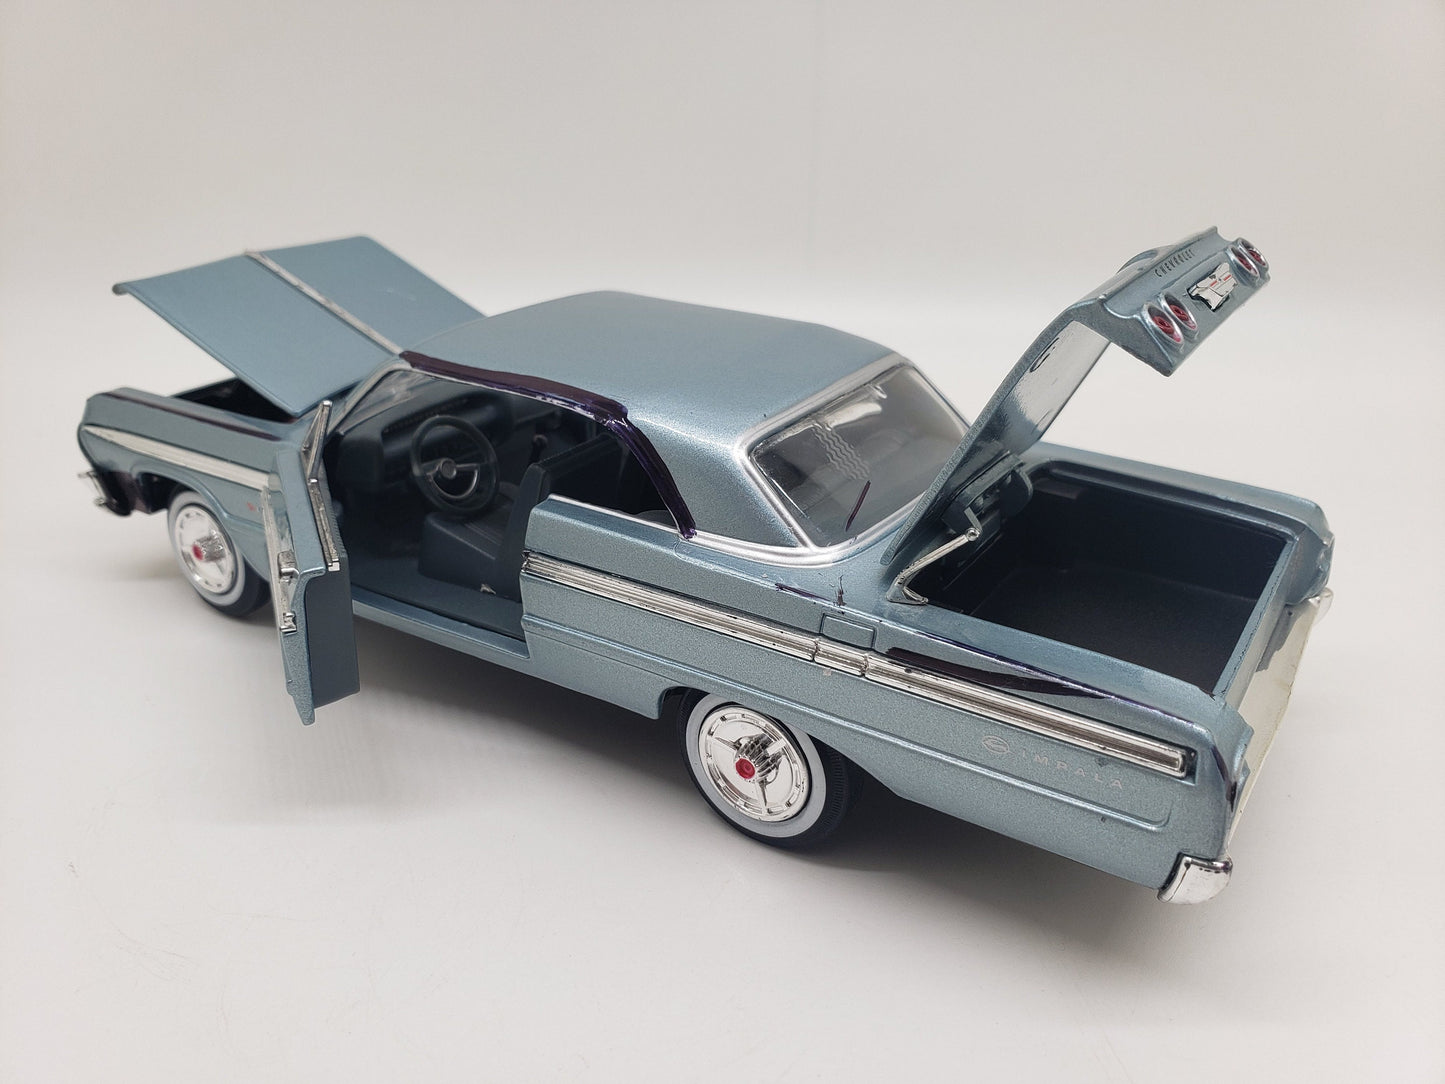 1964 Chevrolet Impala Light Blue Vintage Collectible Replica Scale Model Metal Car Perfect Birthday Gift